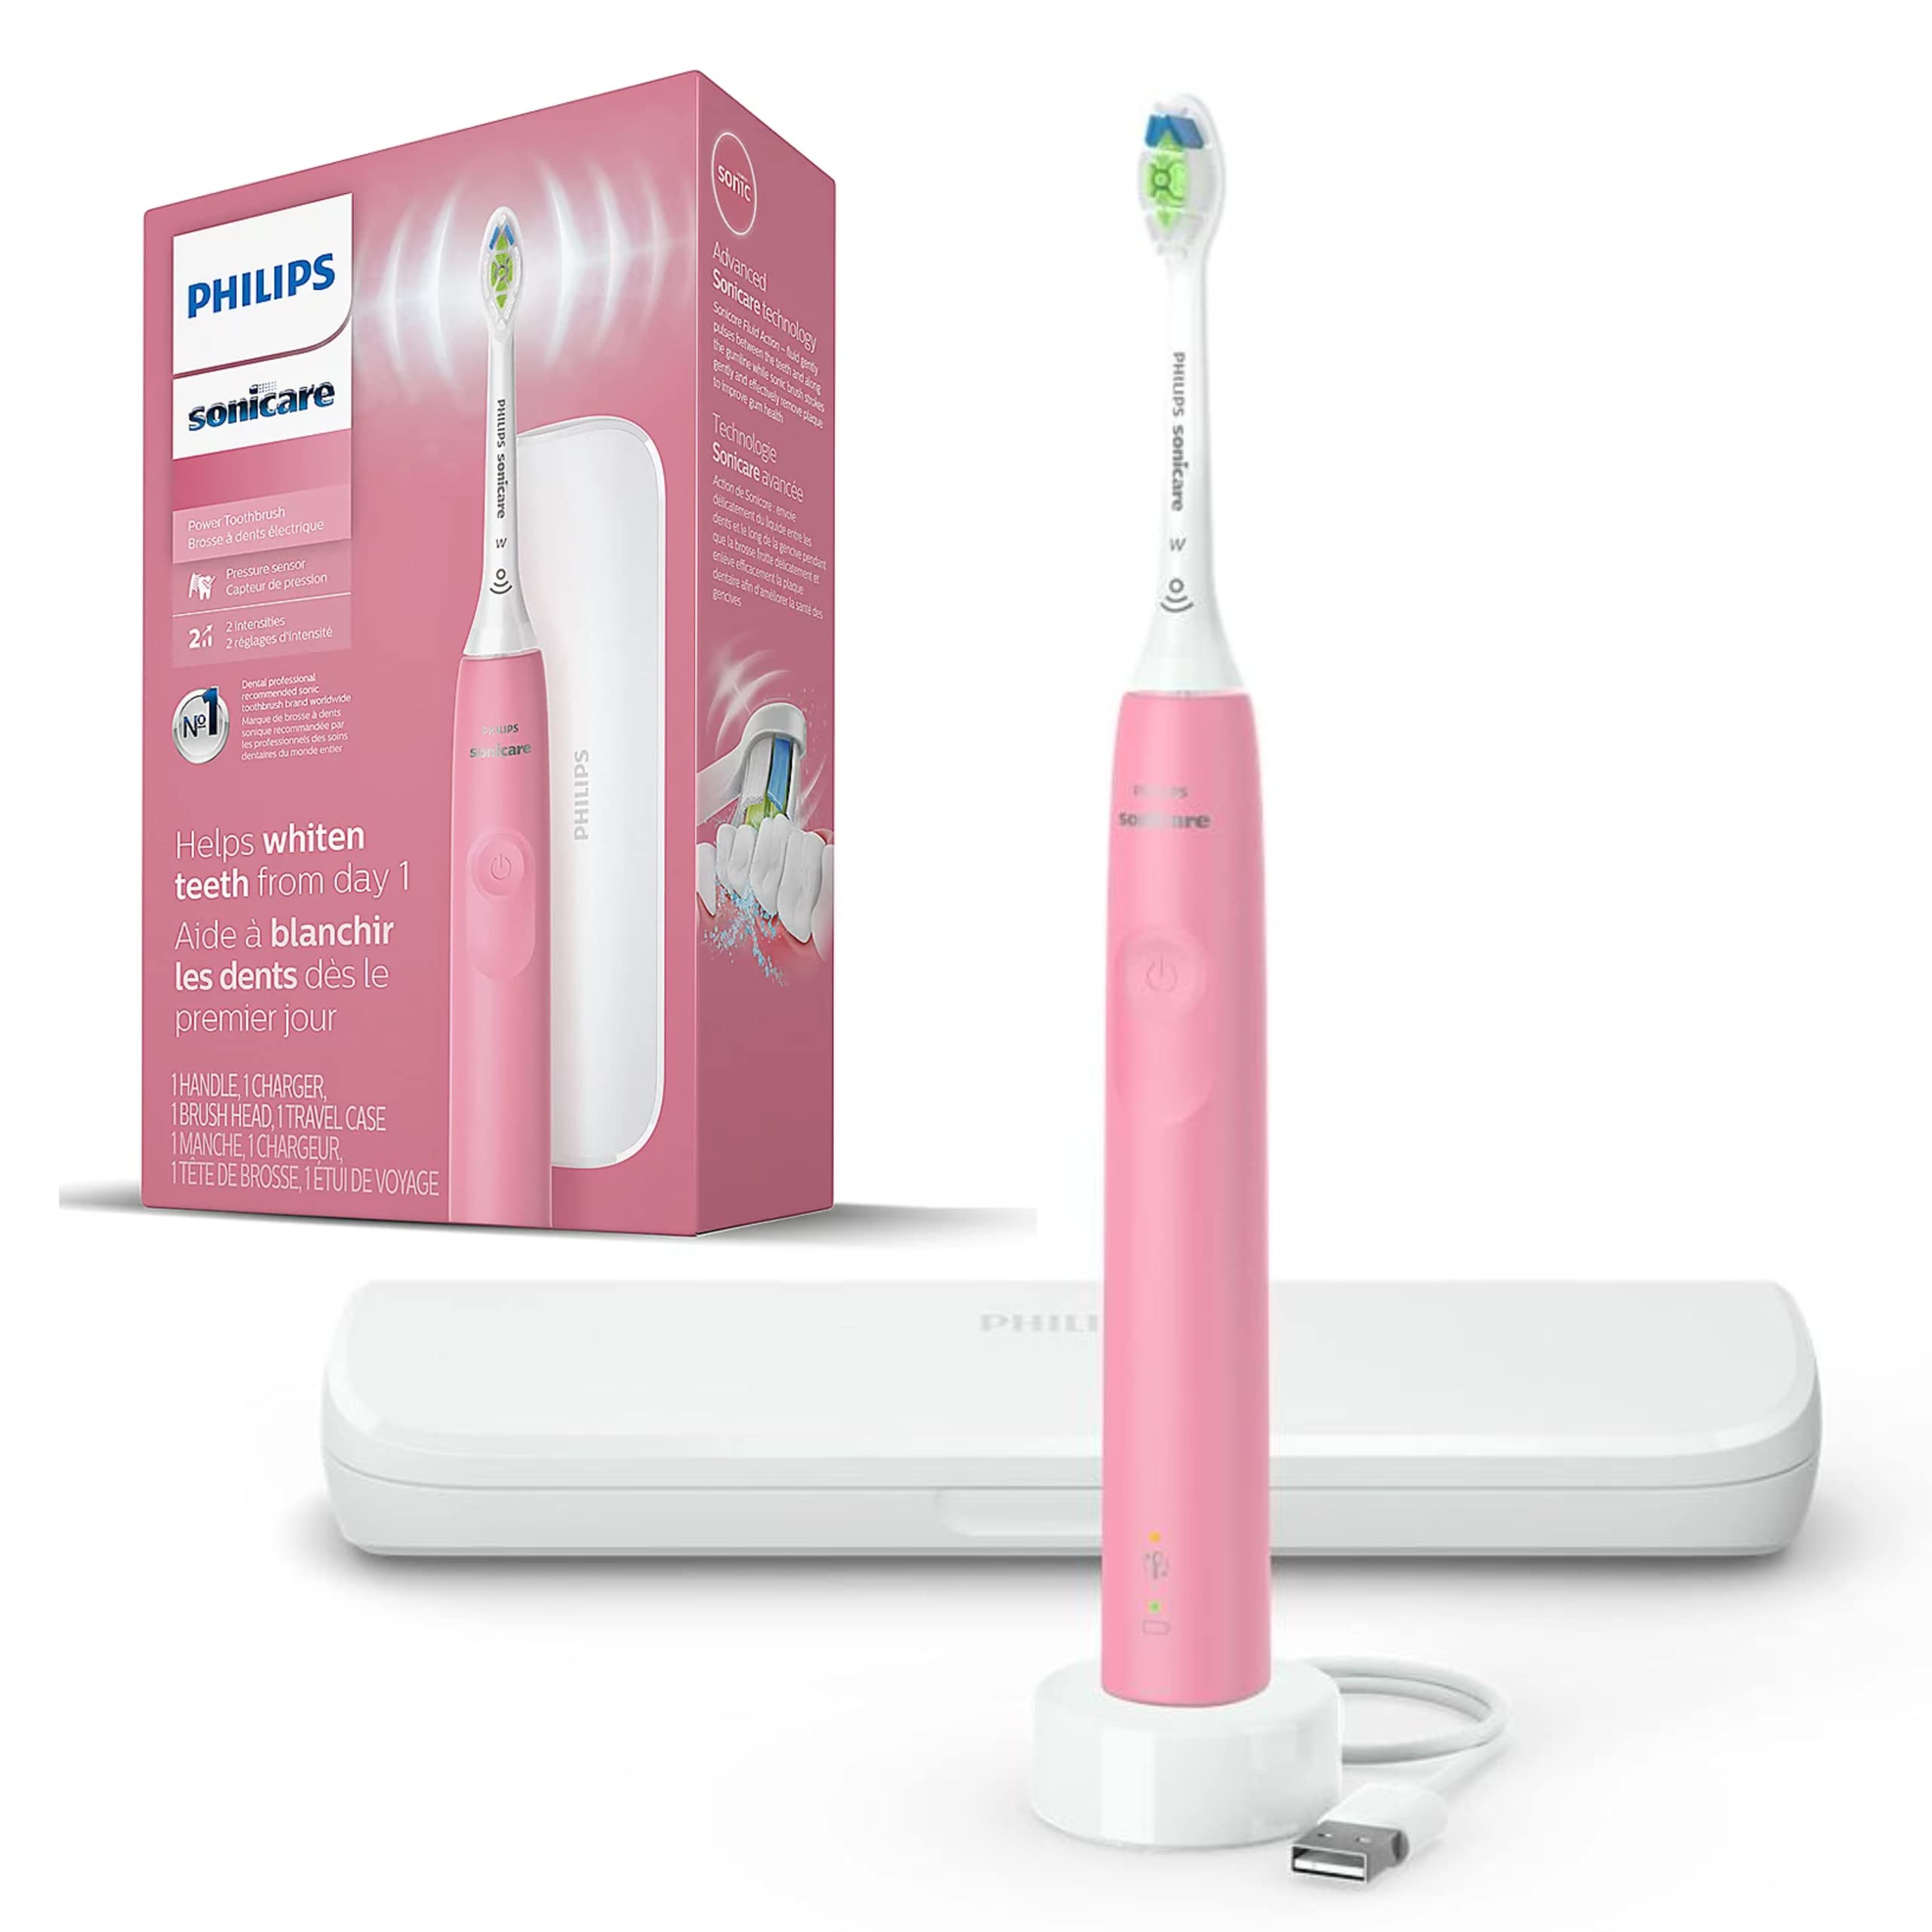 PHILIPS Sonicare Electric Toothbrush DiamondClean, Rechargeable Electric  Tooth Brush with Pressure Sensor, Sonic Electronic Toothbrush, Travel Case,  Pink